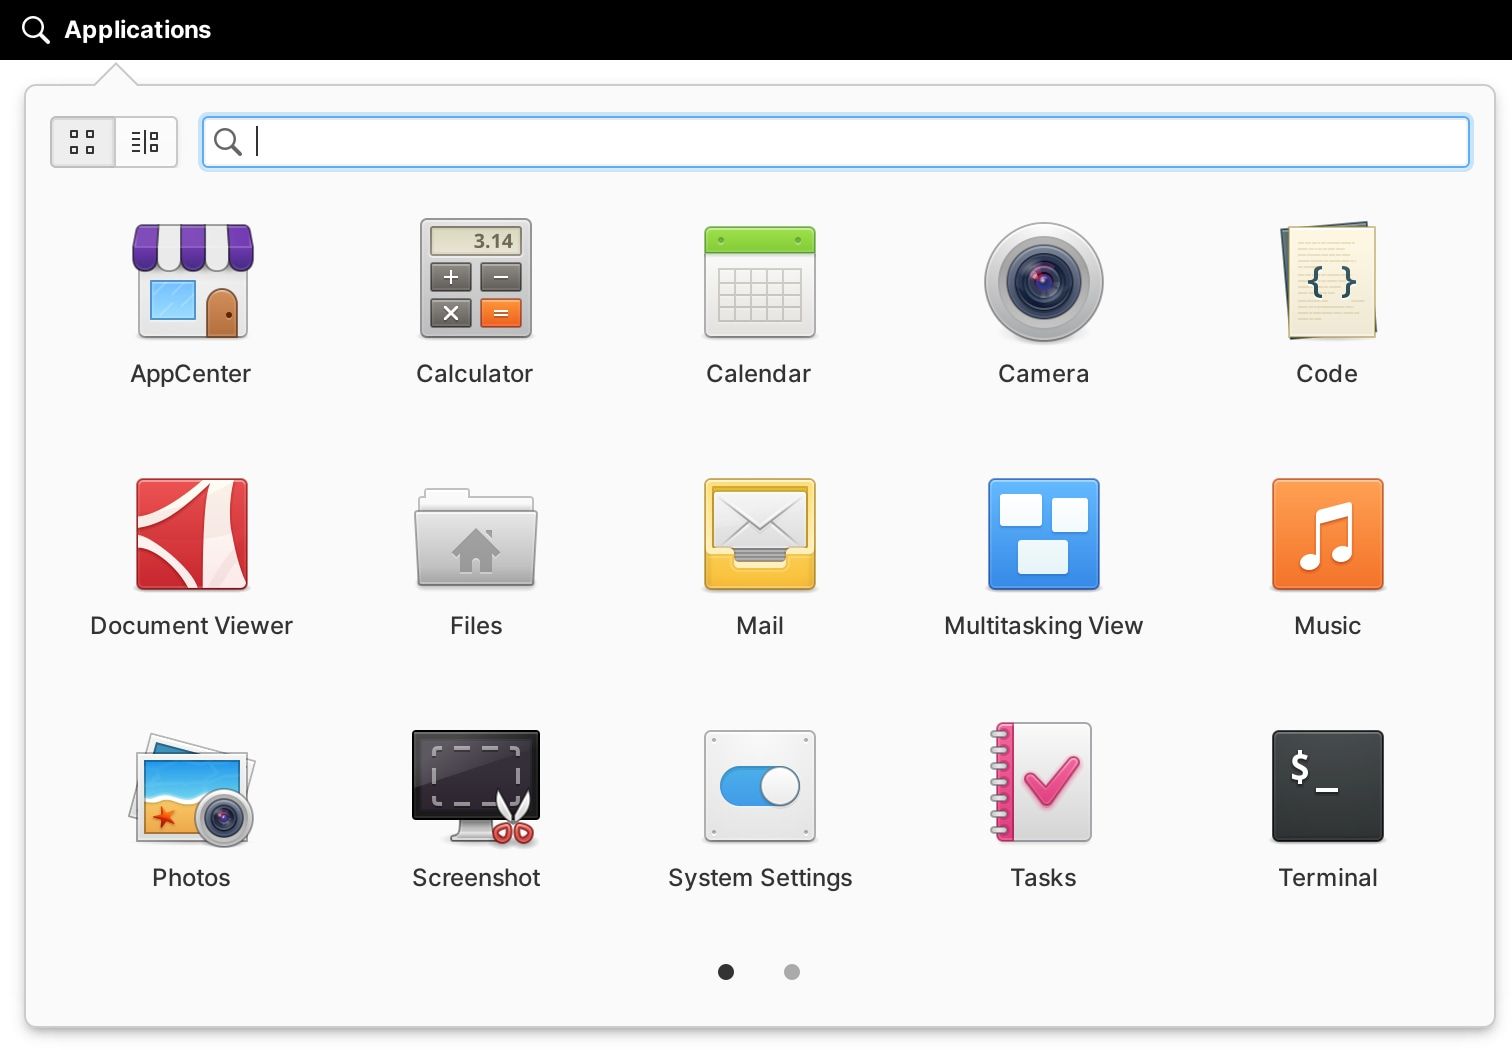 Elementary OS updated applications